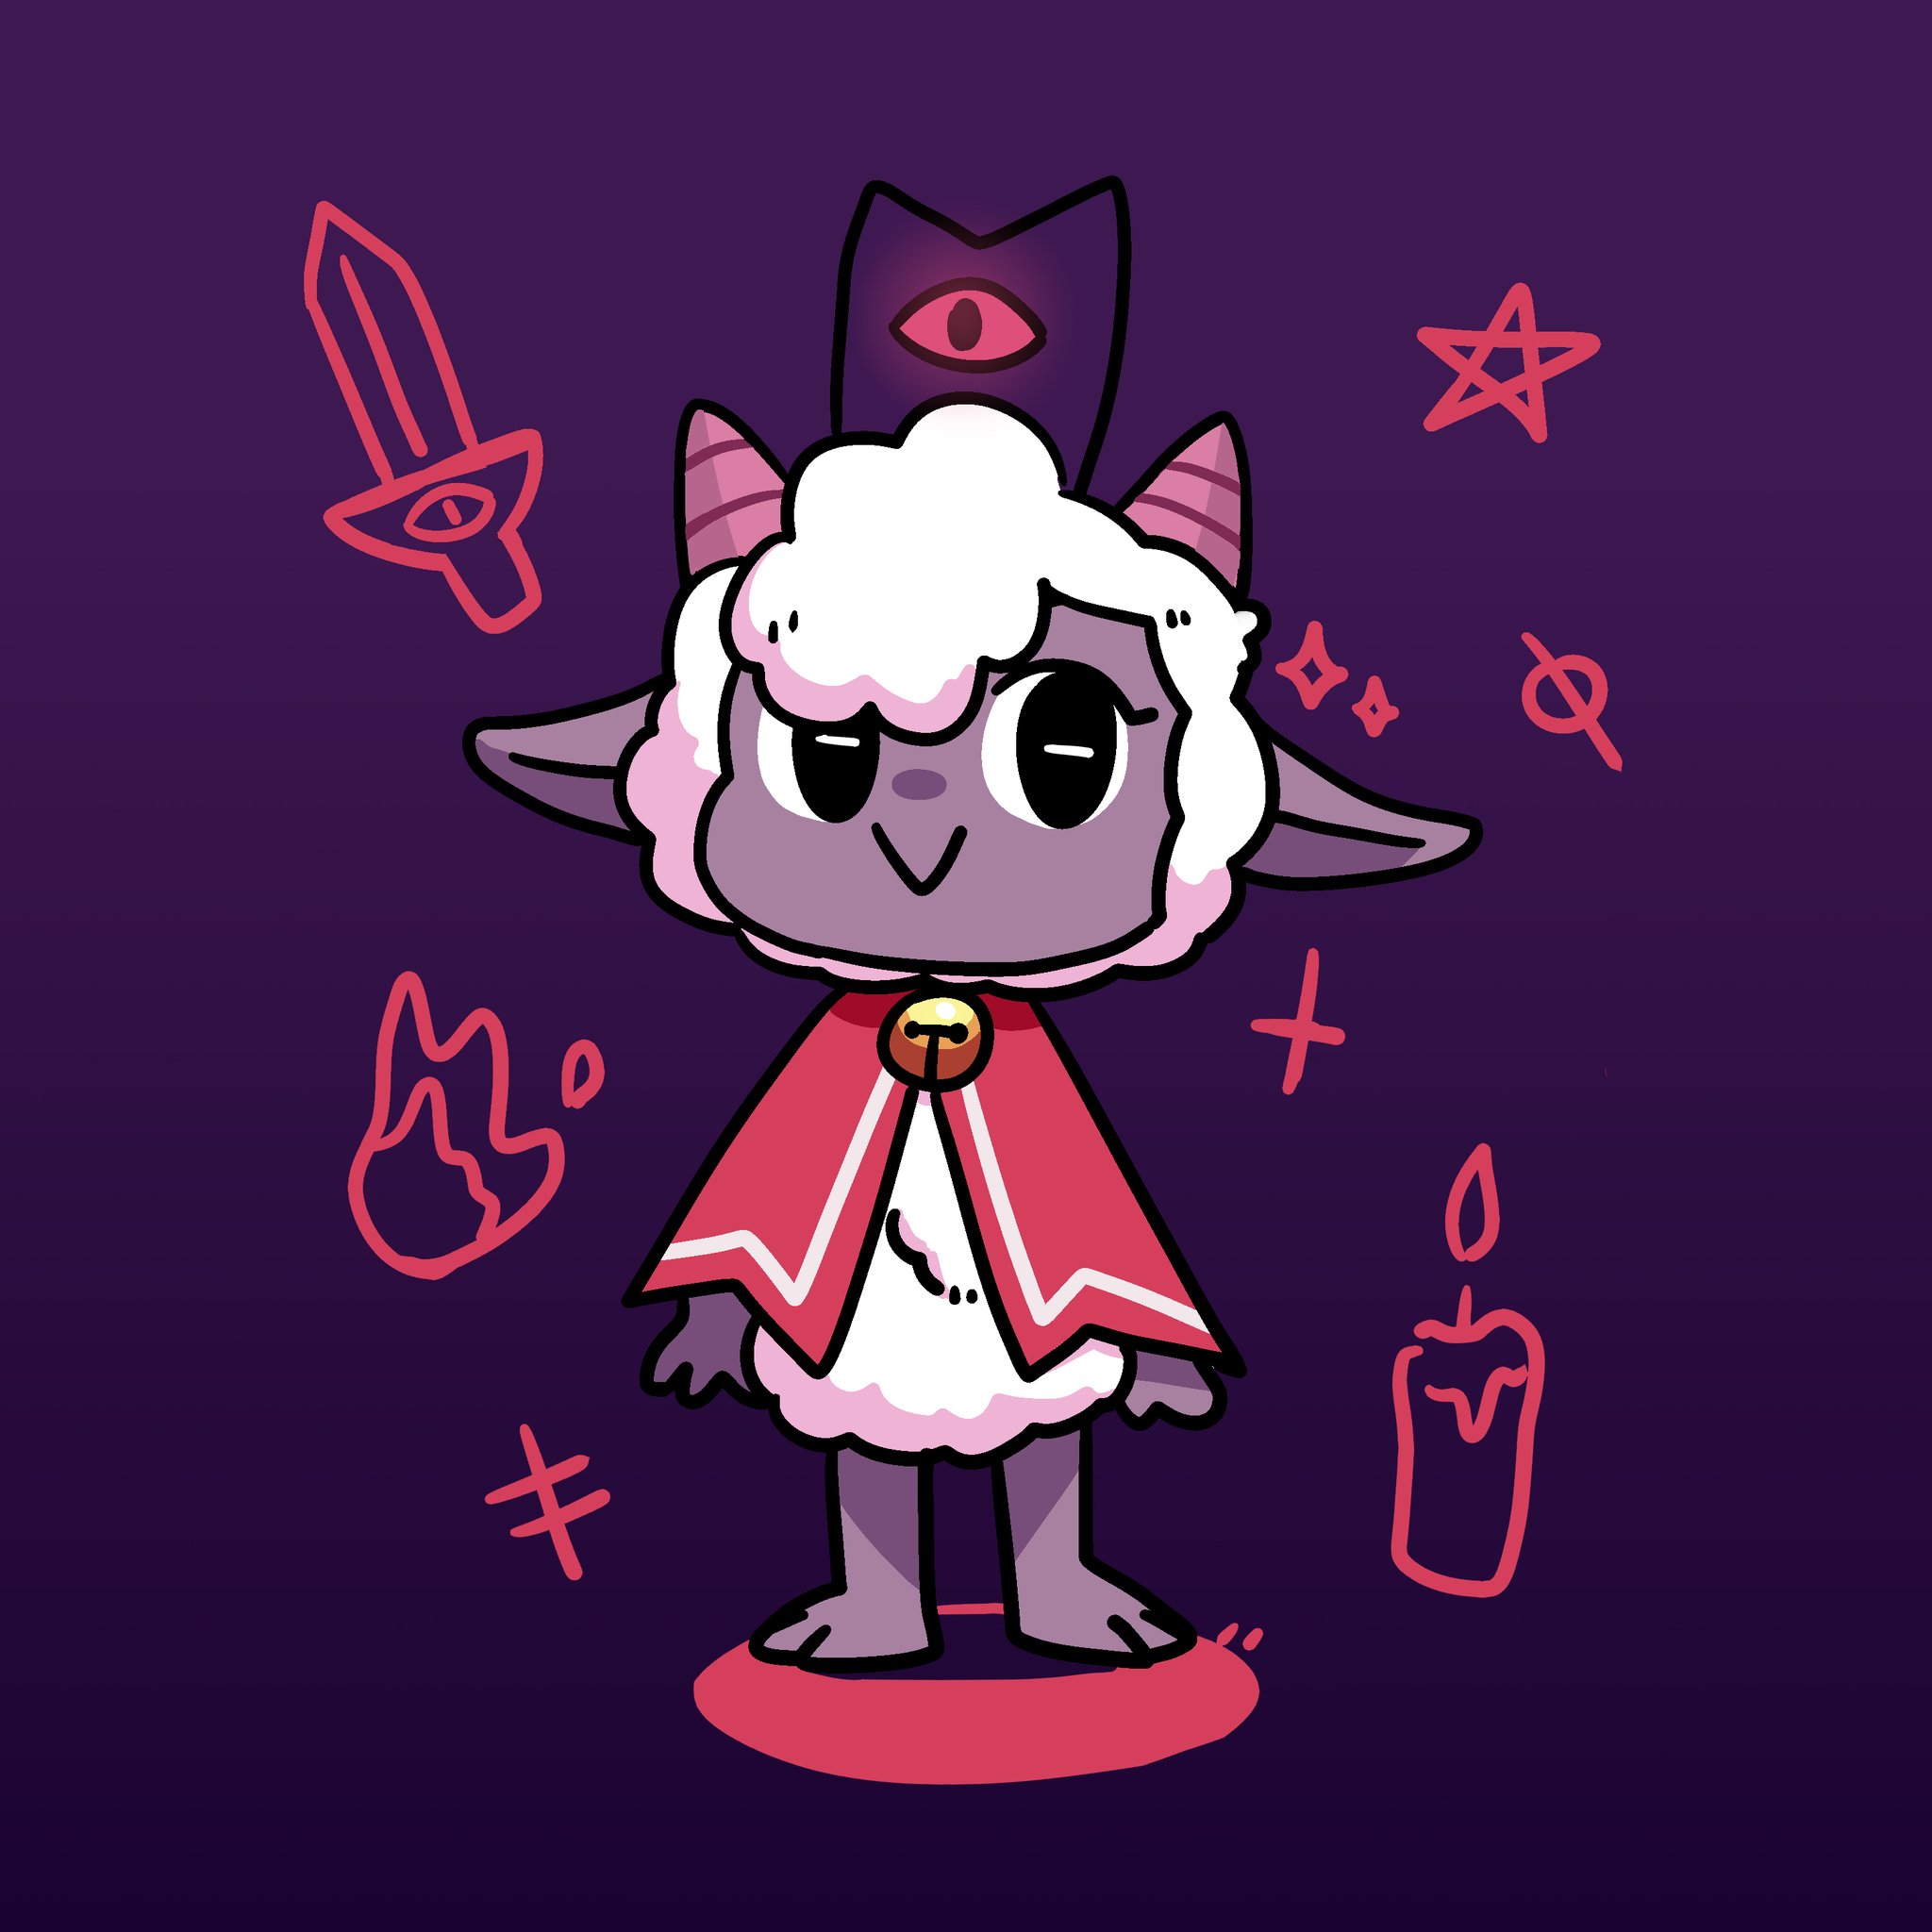 Hondaus Mina on X: I drew a small Fanart of the Lamb from the game, Cult  Of The Lamb! Enjoy! uwu #CultoftheLamb #cultofthelambfanart #furryart  #fanart  / X